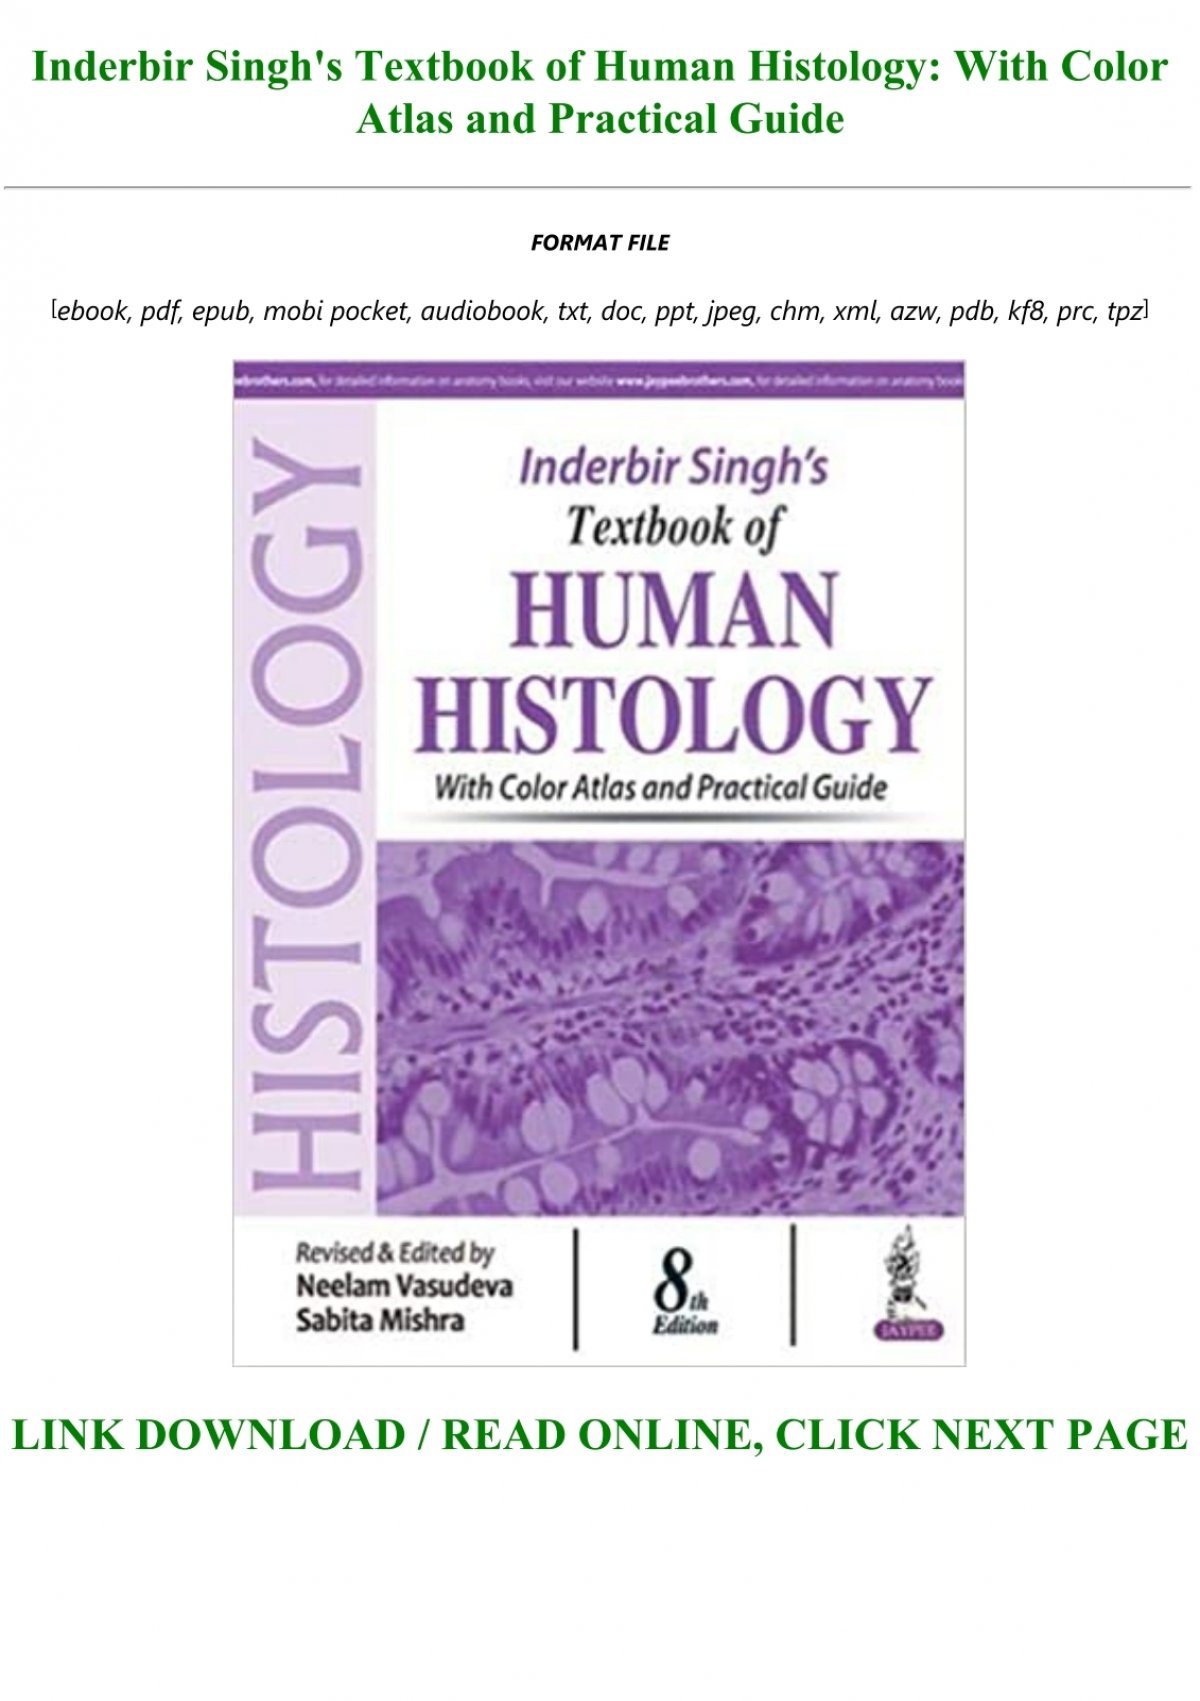 Download P D F Download Inderbir Singh S Textbook Of Human Histology With Color Atlas And Practical Guide Txt Pdf Epub